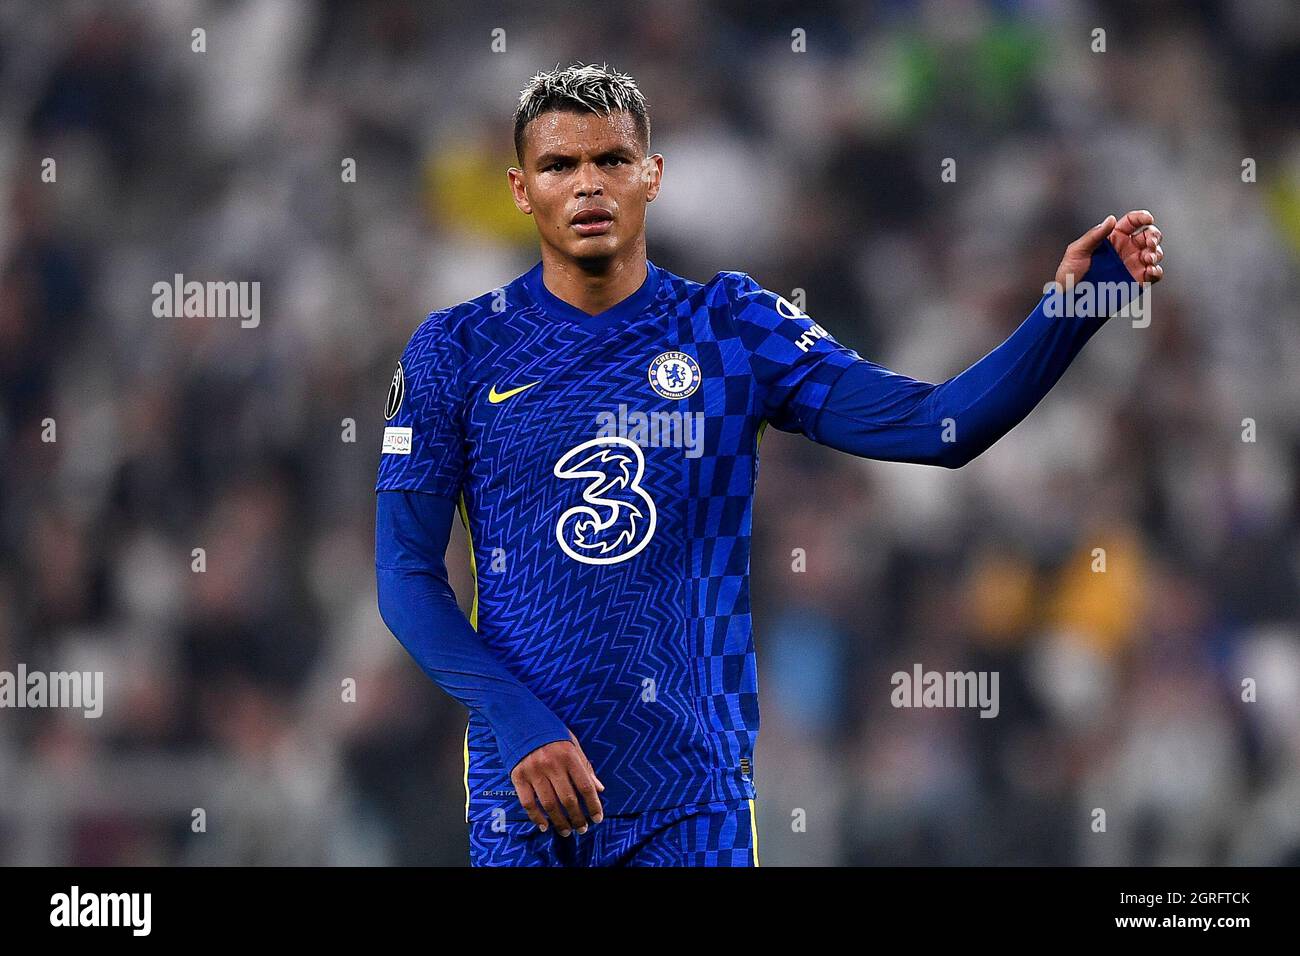 Turin, Italy. 29 September 2021. Thiago Silva of Chelsea FC gestures during the UEFA Champions League football match between Juventus FC and Chelsea FC. Credit: Nicolò Campo/Alamy Live News Stock Photo